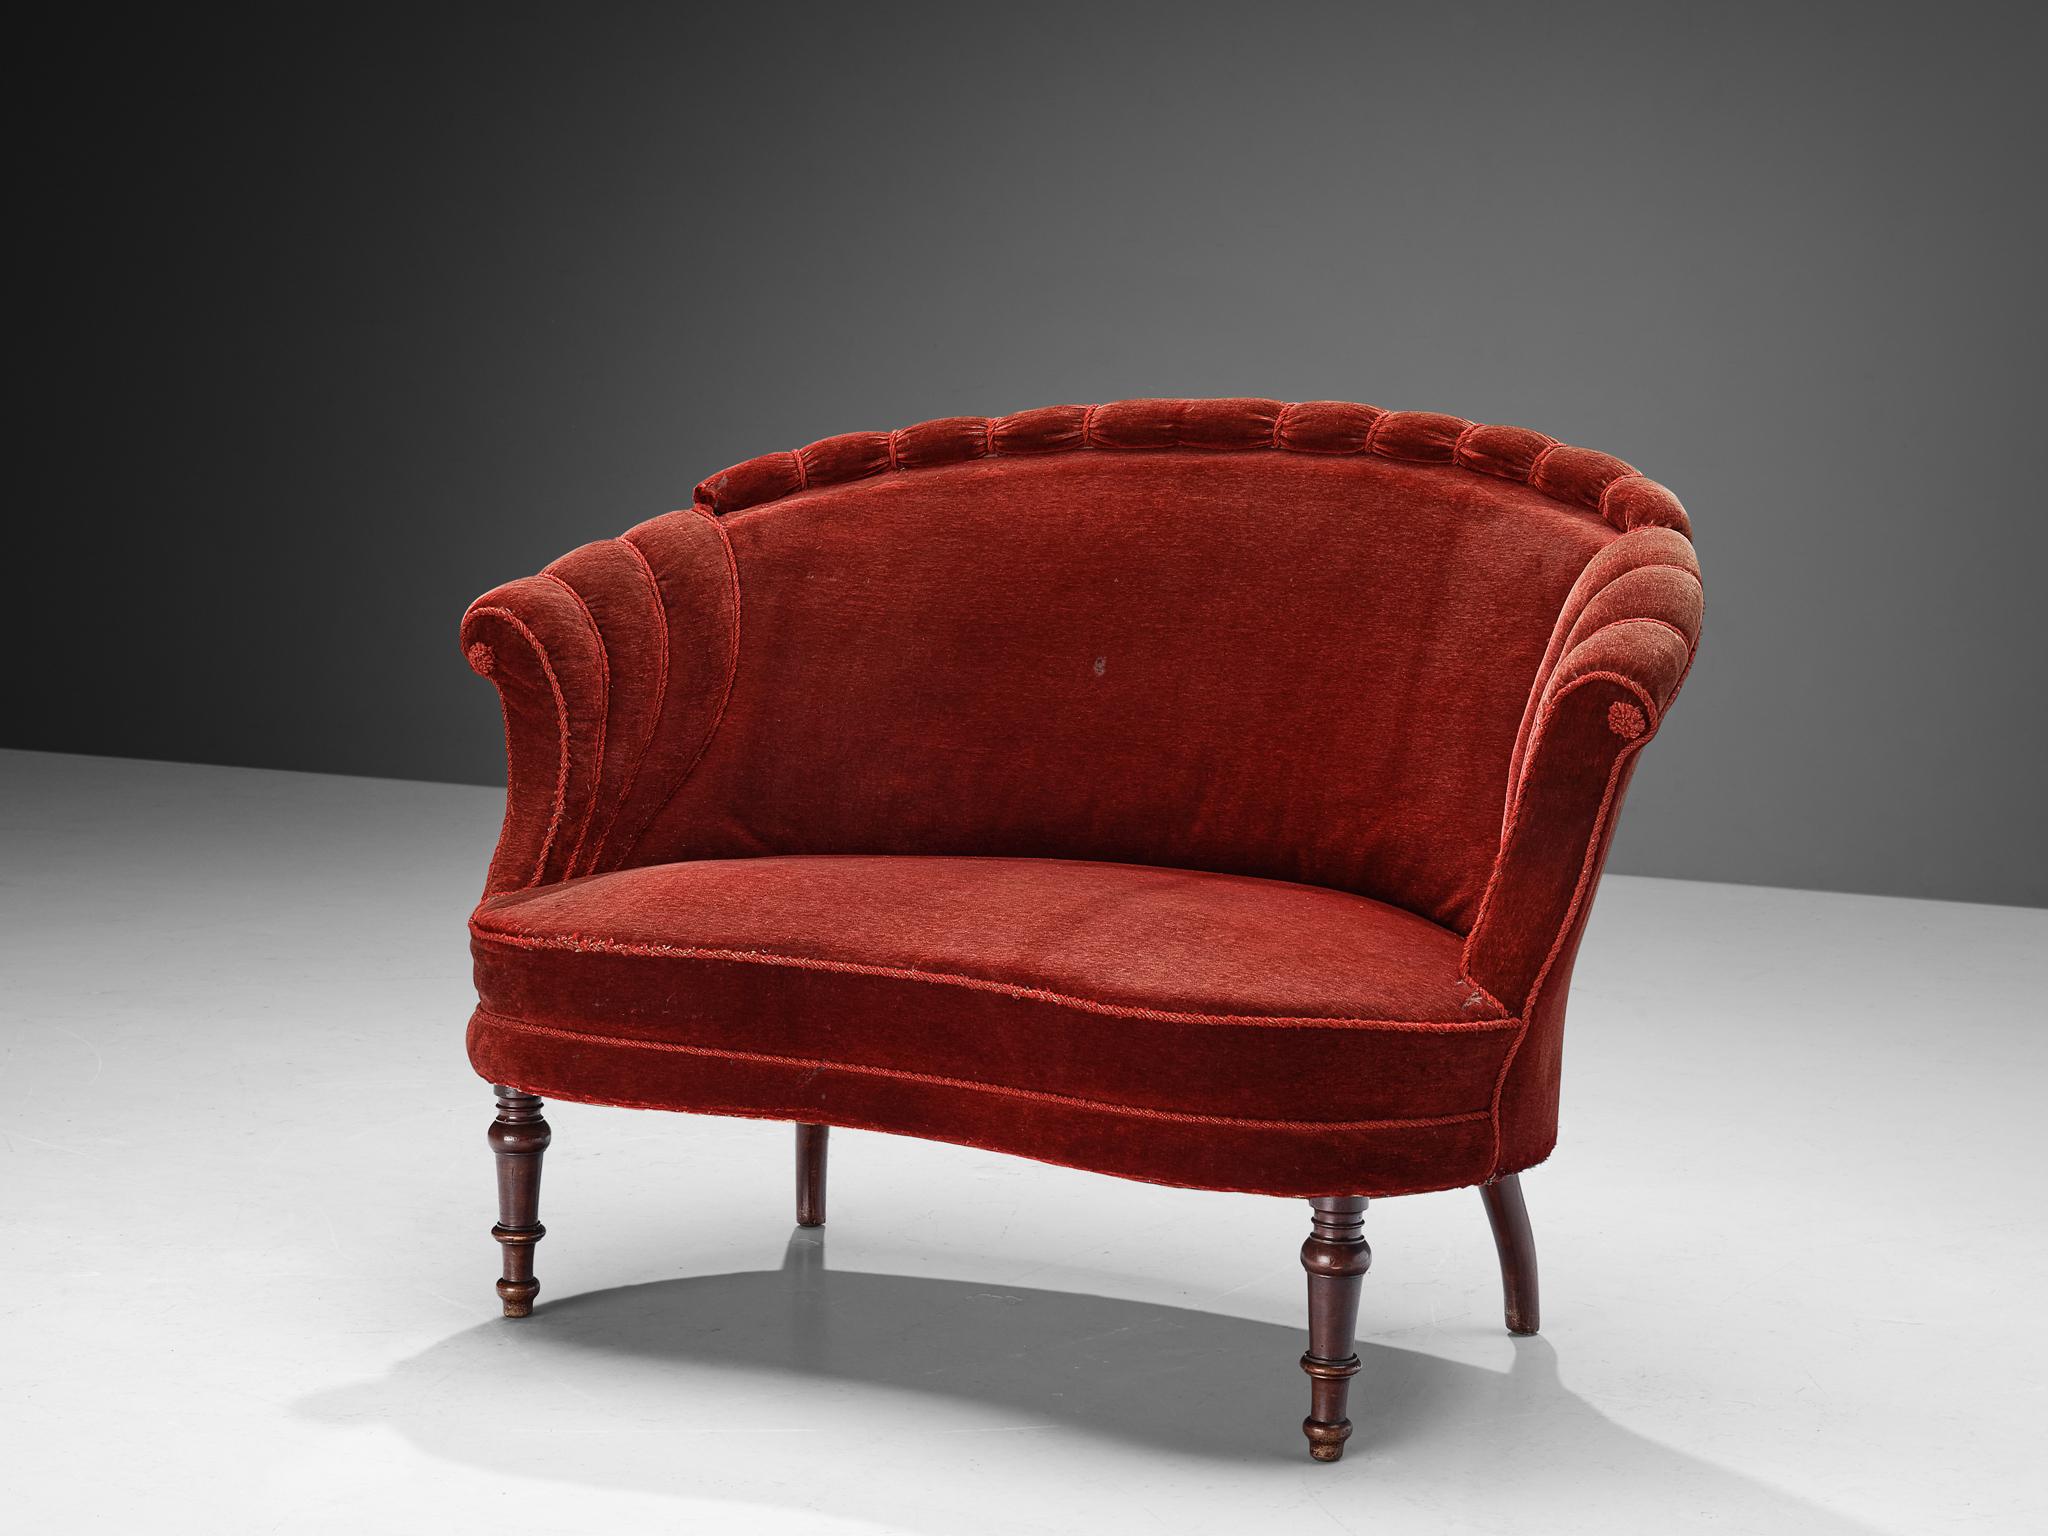 Settee, velvet fabric, stained beech, France, 1930s 

This exquisite settee of France origin adopts stylistic motifs of the 19th century Victorian Era as can been seen in the ornate legs and the back which has a certain theatrical aesthetic with